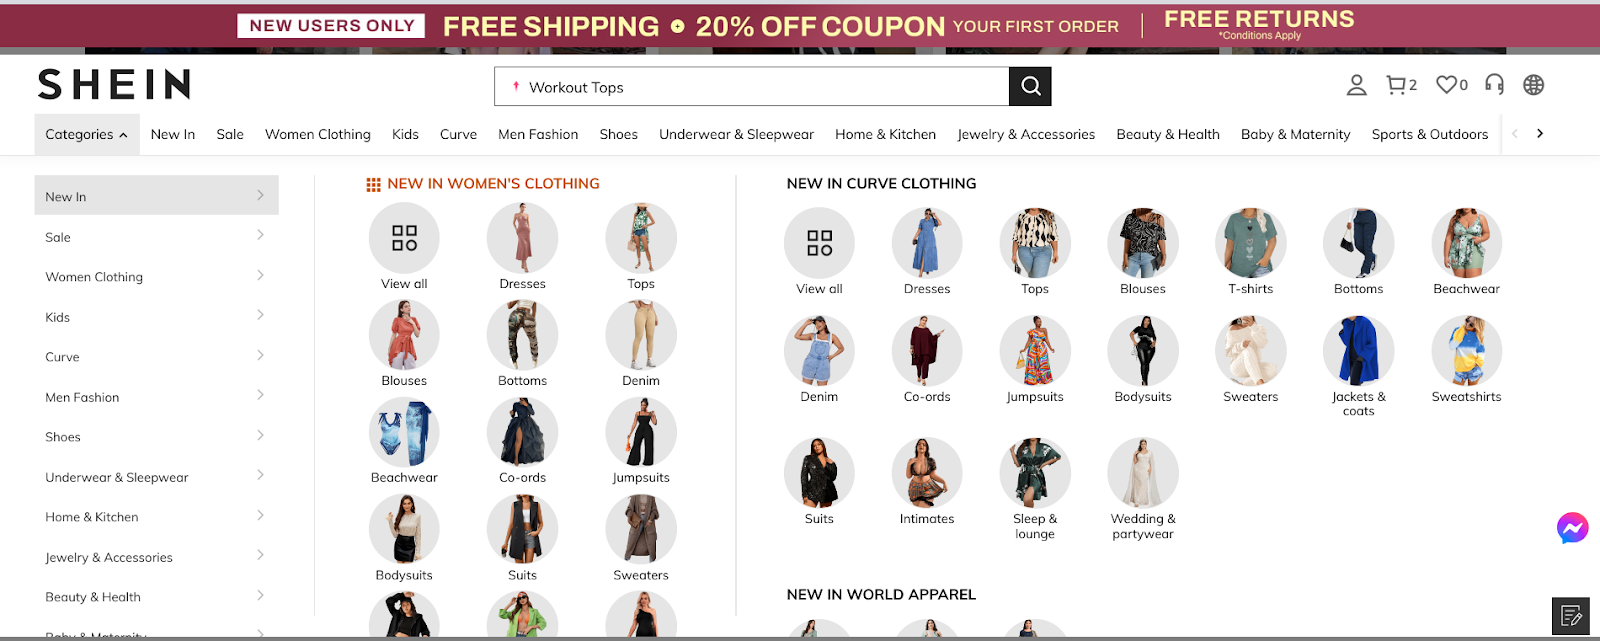 SHEIN categories page